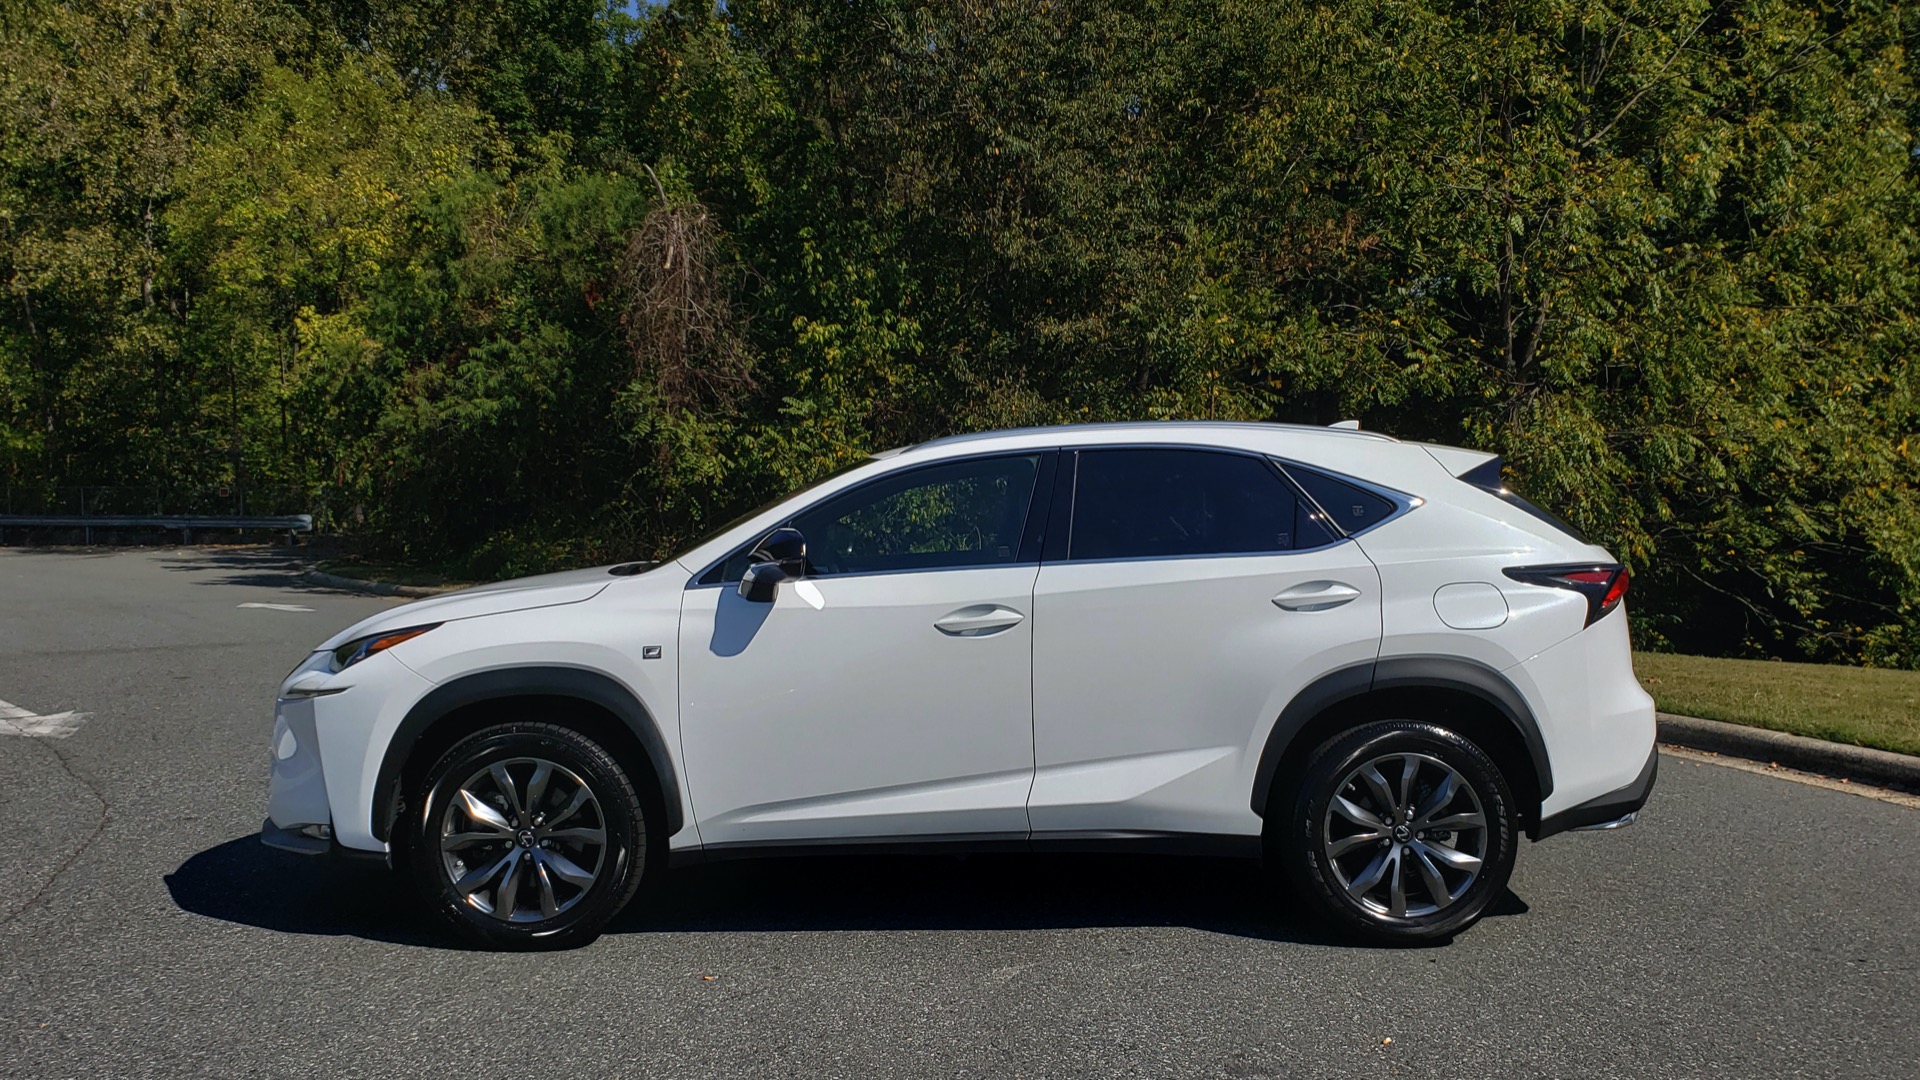 Used 2016 Lexus NX 200t F-SPORT / BACK-UP CAMERA / 18 INCH WHEELS for sale Sold at Formula Imports in Charlotte NC 28227 2